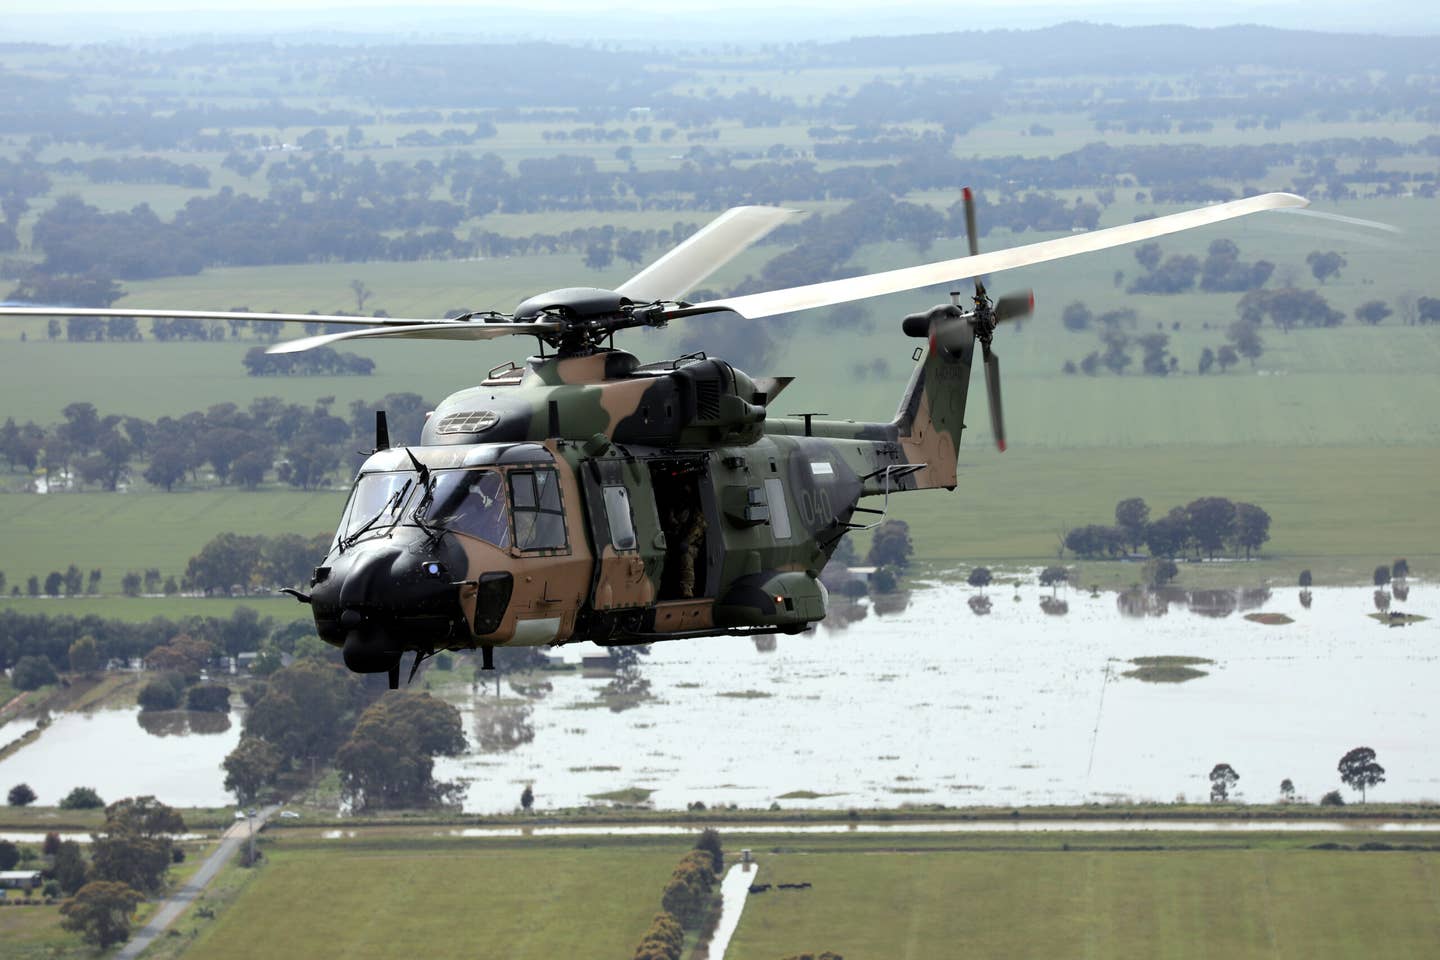 An Australian Army MRH90 Taipan helicopter from the 6th Aviation Regiment conducts reconnaissance at Shepparton, Victoria, as part of Operation Flood Assist 2022. Australian Army personnel from the 6th Aviation Regiment helped provide assistance to flood-affected communities in Victoria and New South Wales. <em>COMMONWEALTH OF AUSTRALIA, DEPARTMENT OF DEFENSE</em>